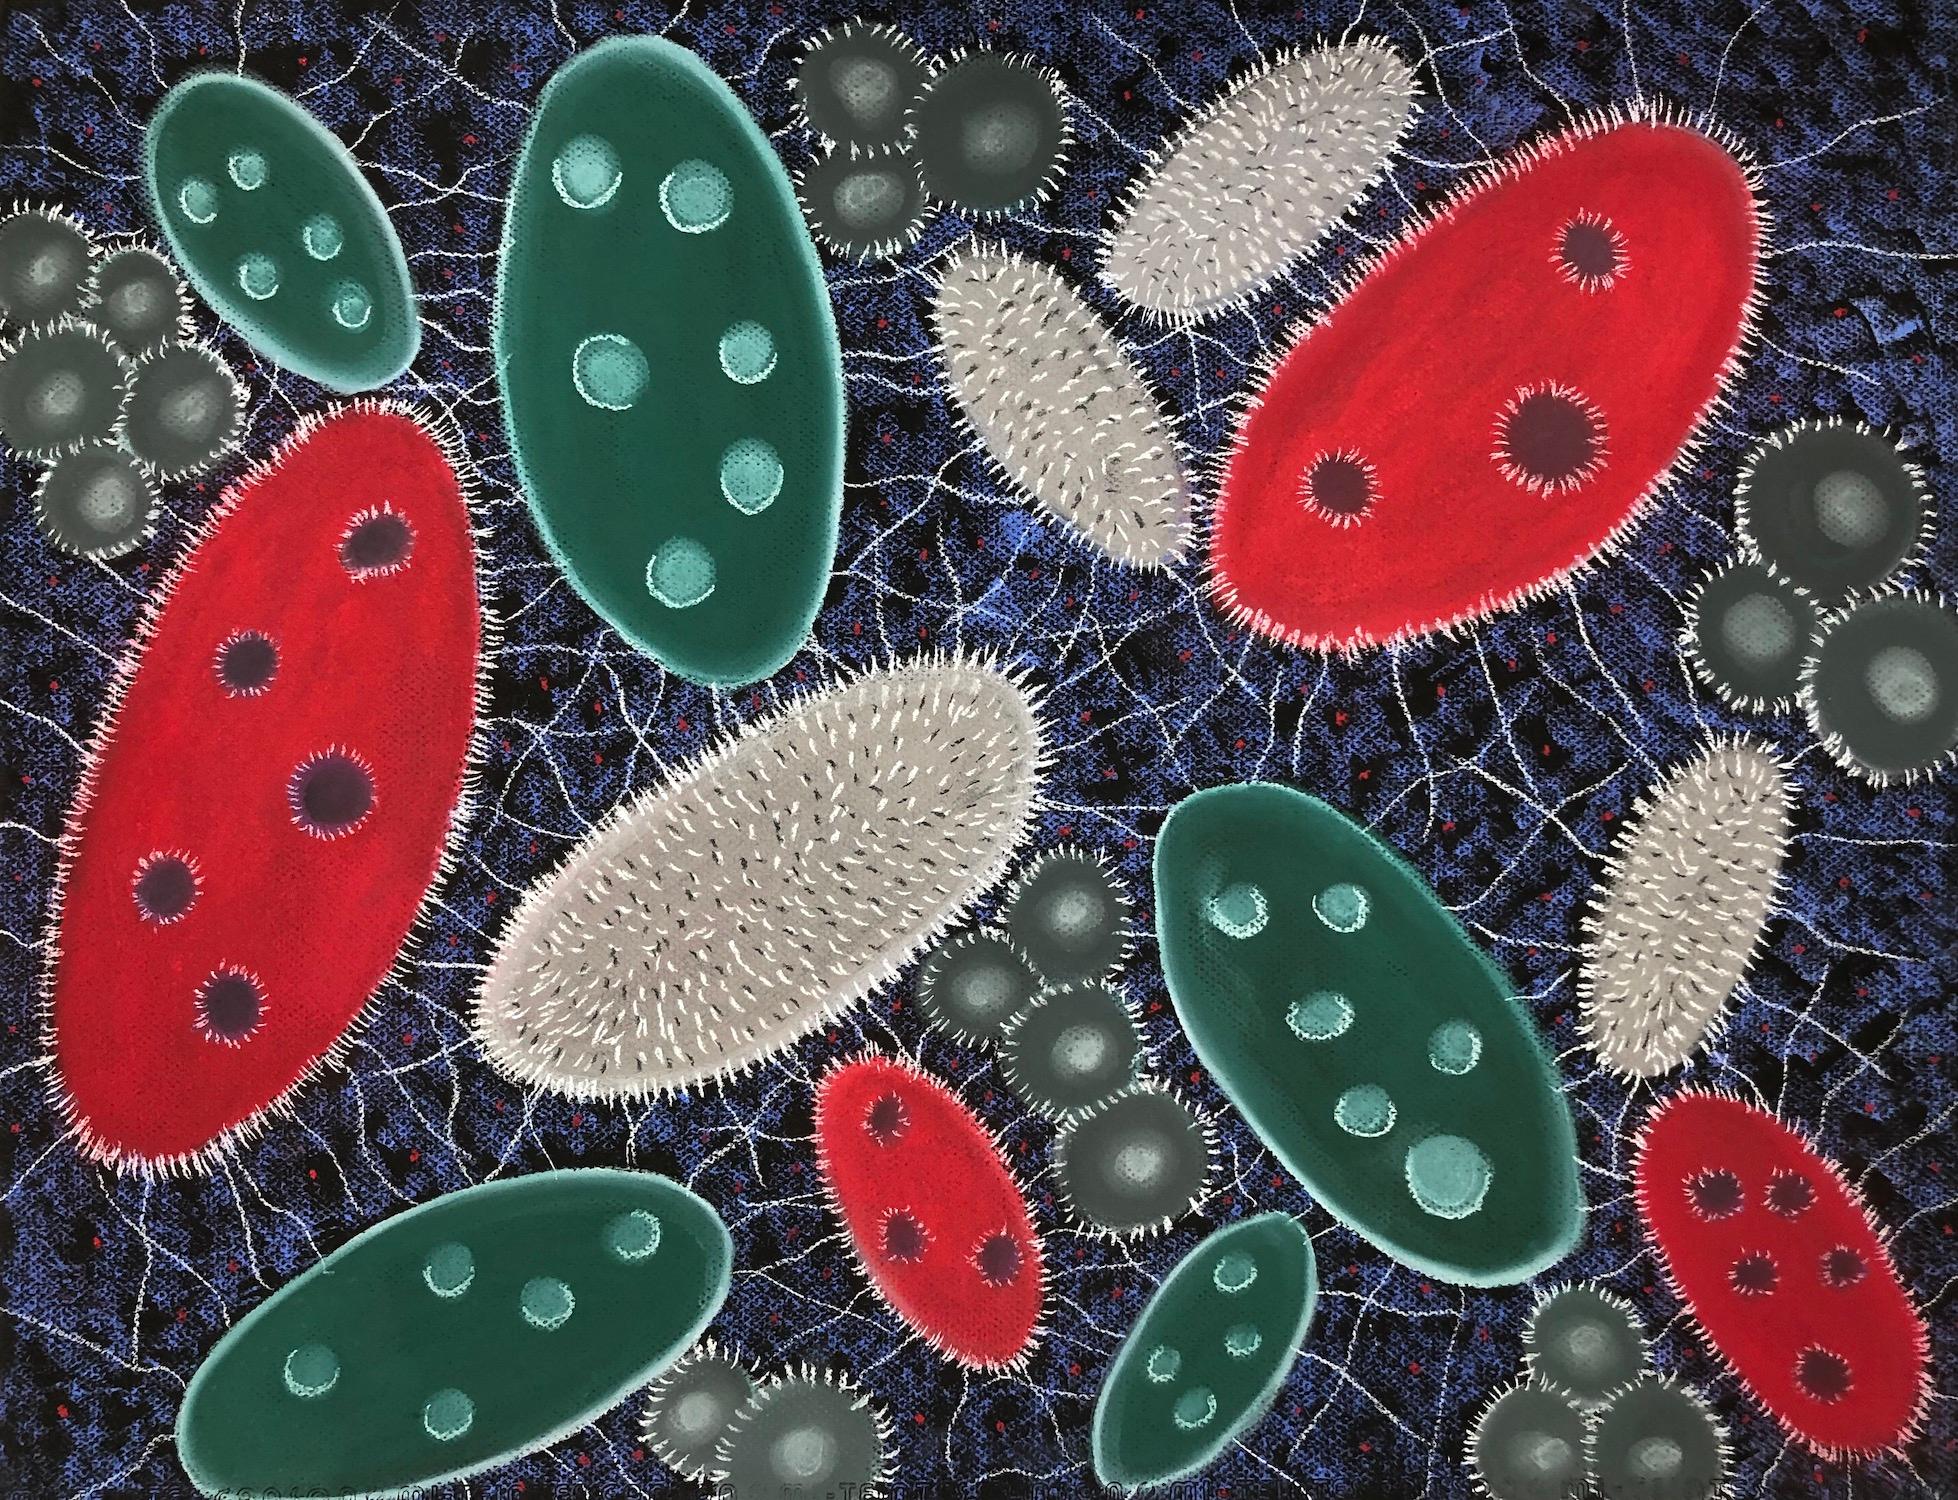 "Macroaction 13", pastel, drawing, microscopic, blue, red, green, grey, white